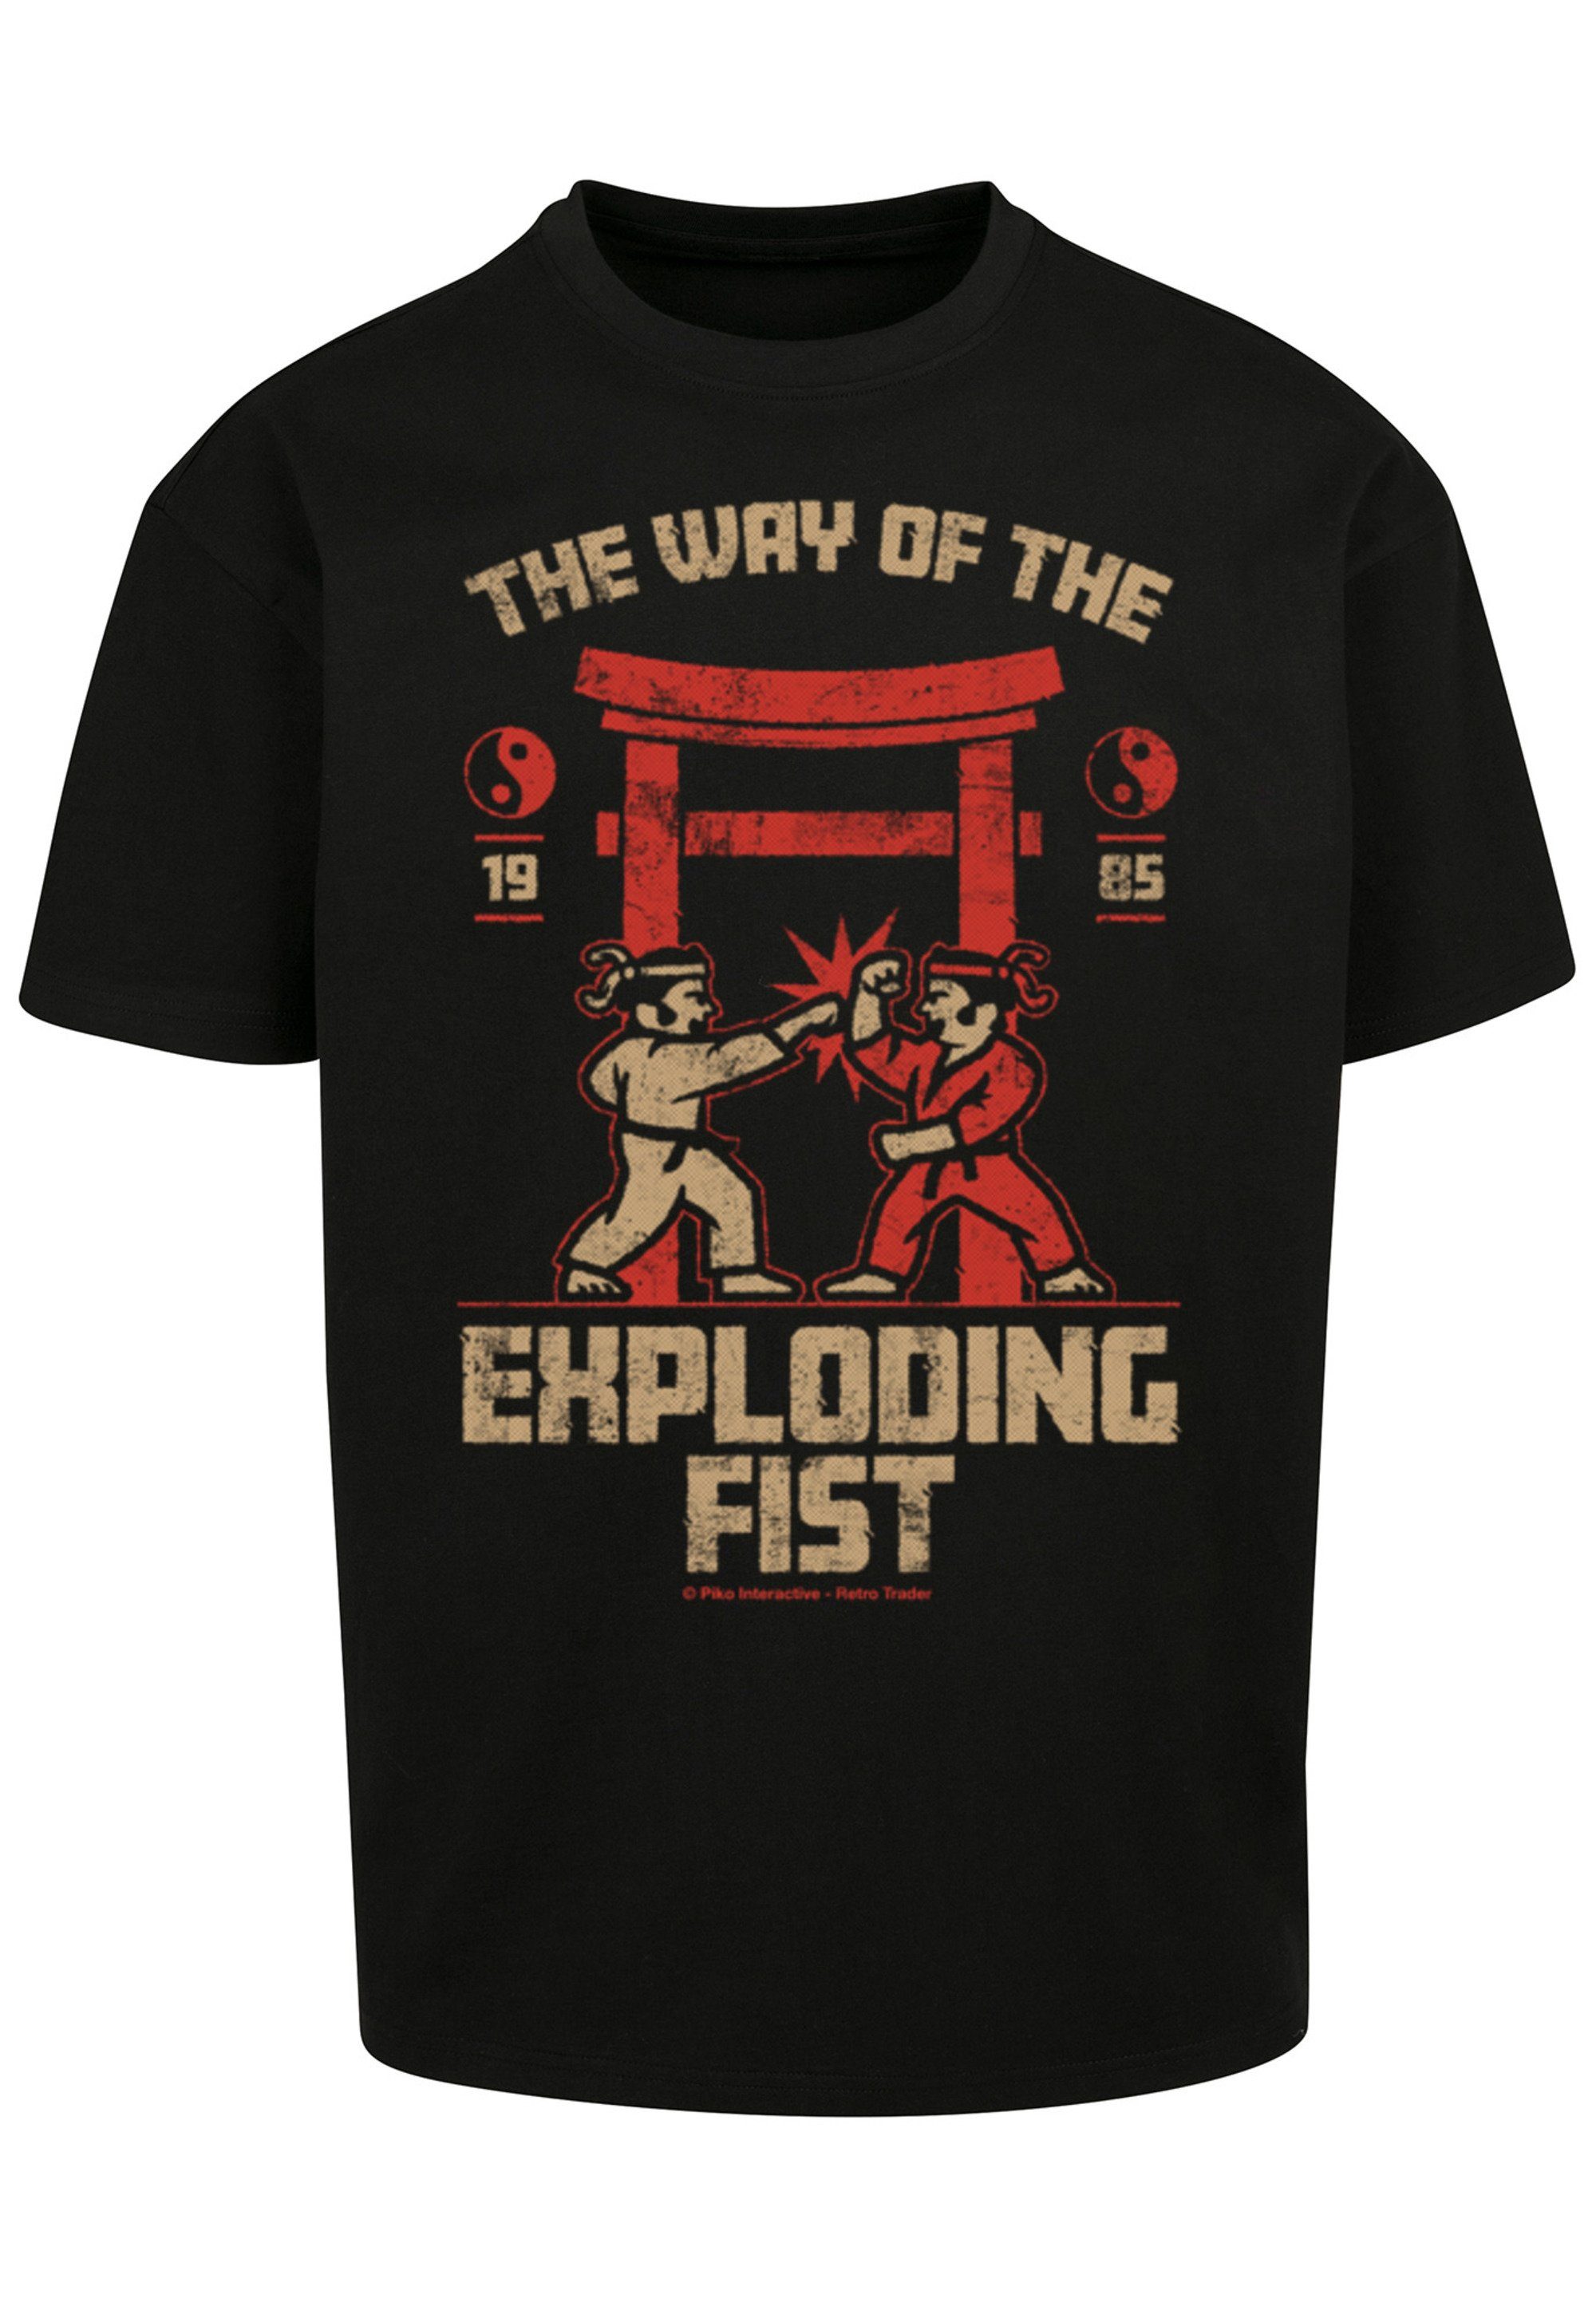 Of Way The Retro schwarz Exploding SEVENSQUARED Print F4NT4STIC Fist Gaming The T-Shirt